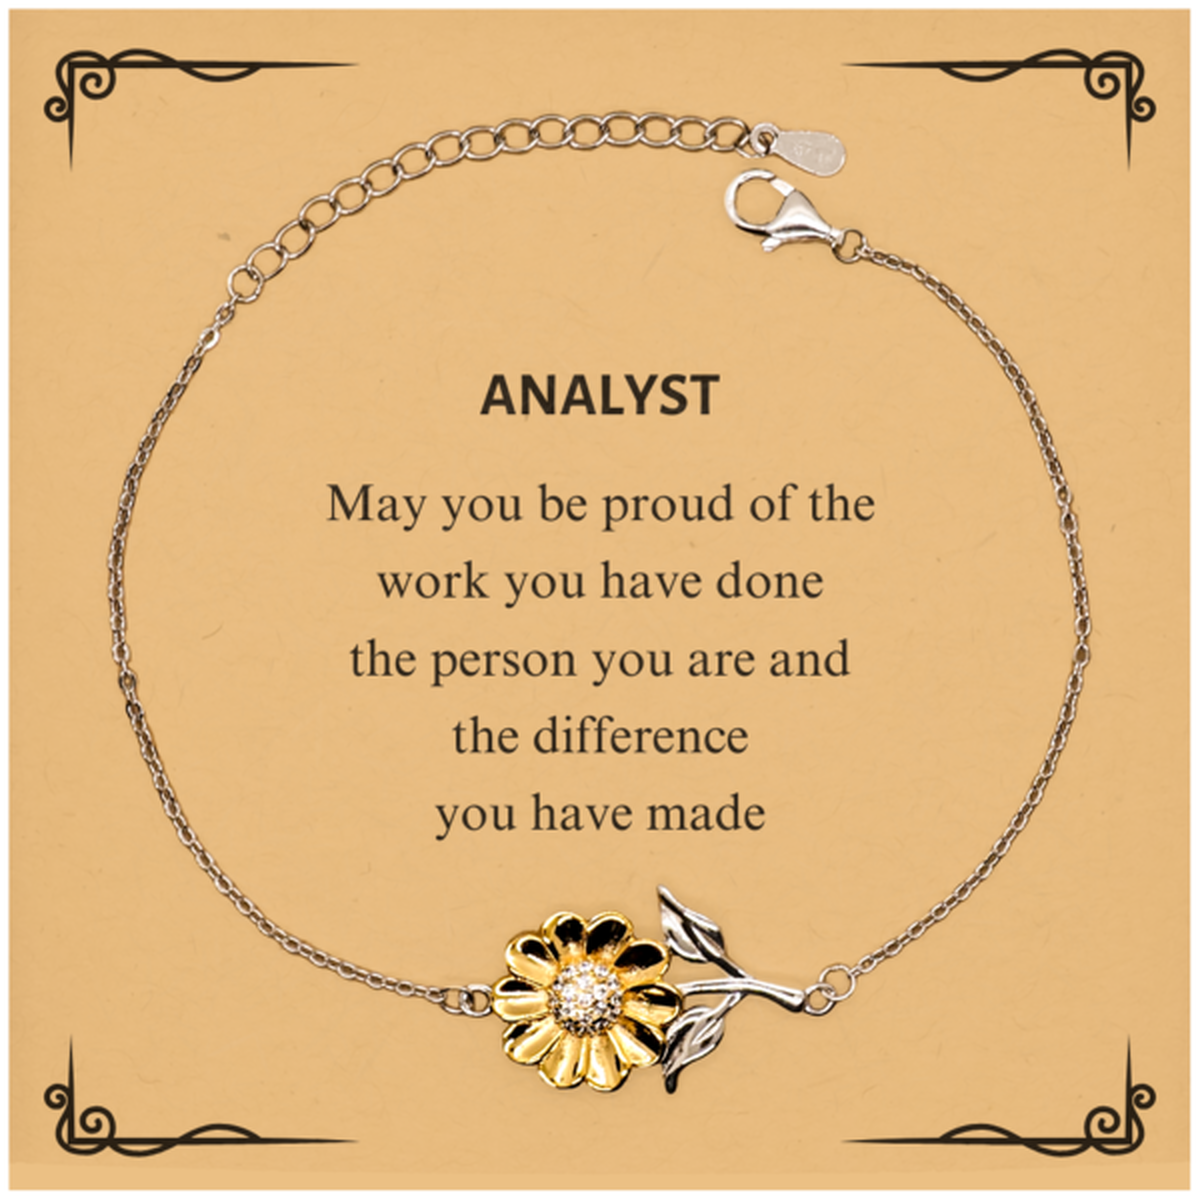 Analyst May you be proud of the work you have done, Retirement Analyst Sunflower Bracelet for Colleague Appreciation Gifts Amazing for Analyst